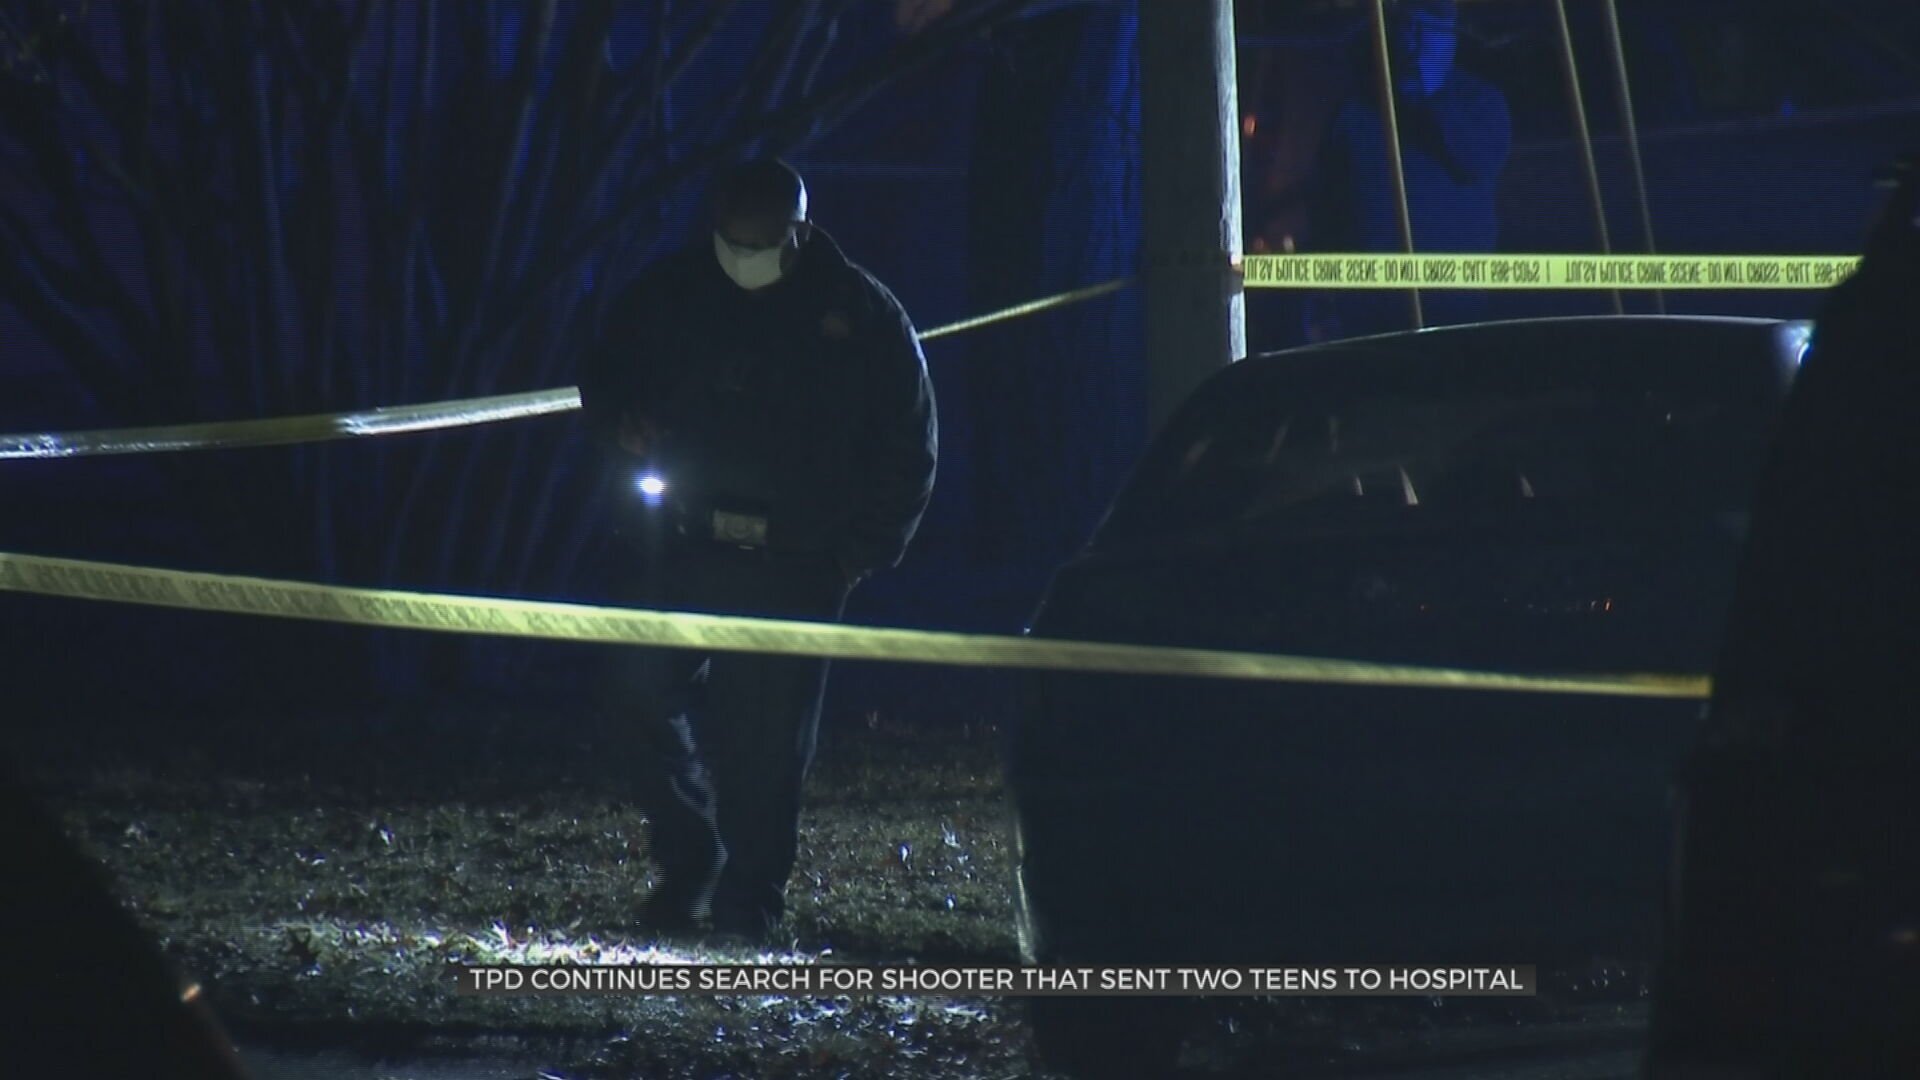 Tulsa Police: 2 Teens 'Fighting For Their Lives' After Shooting